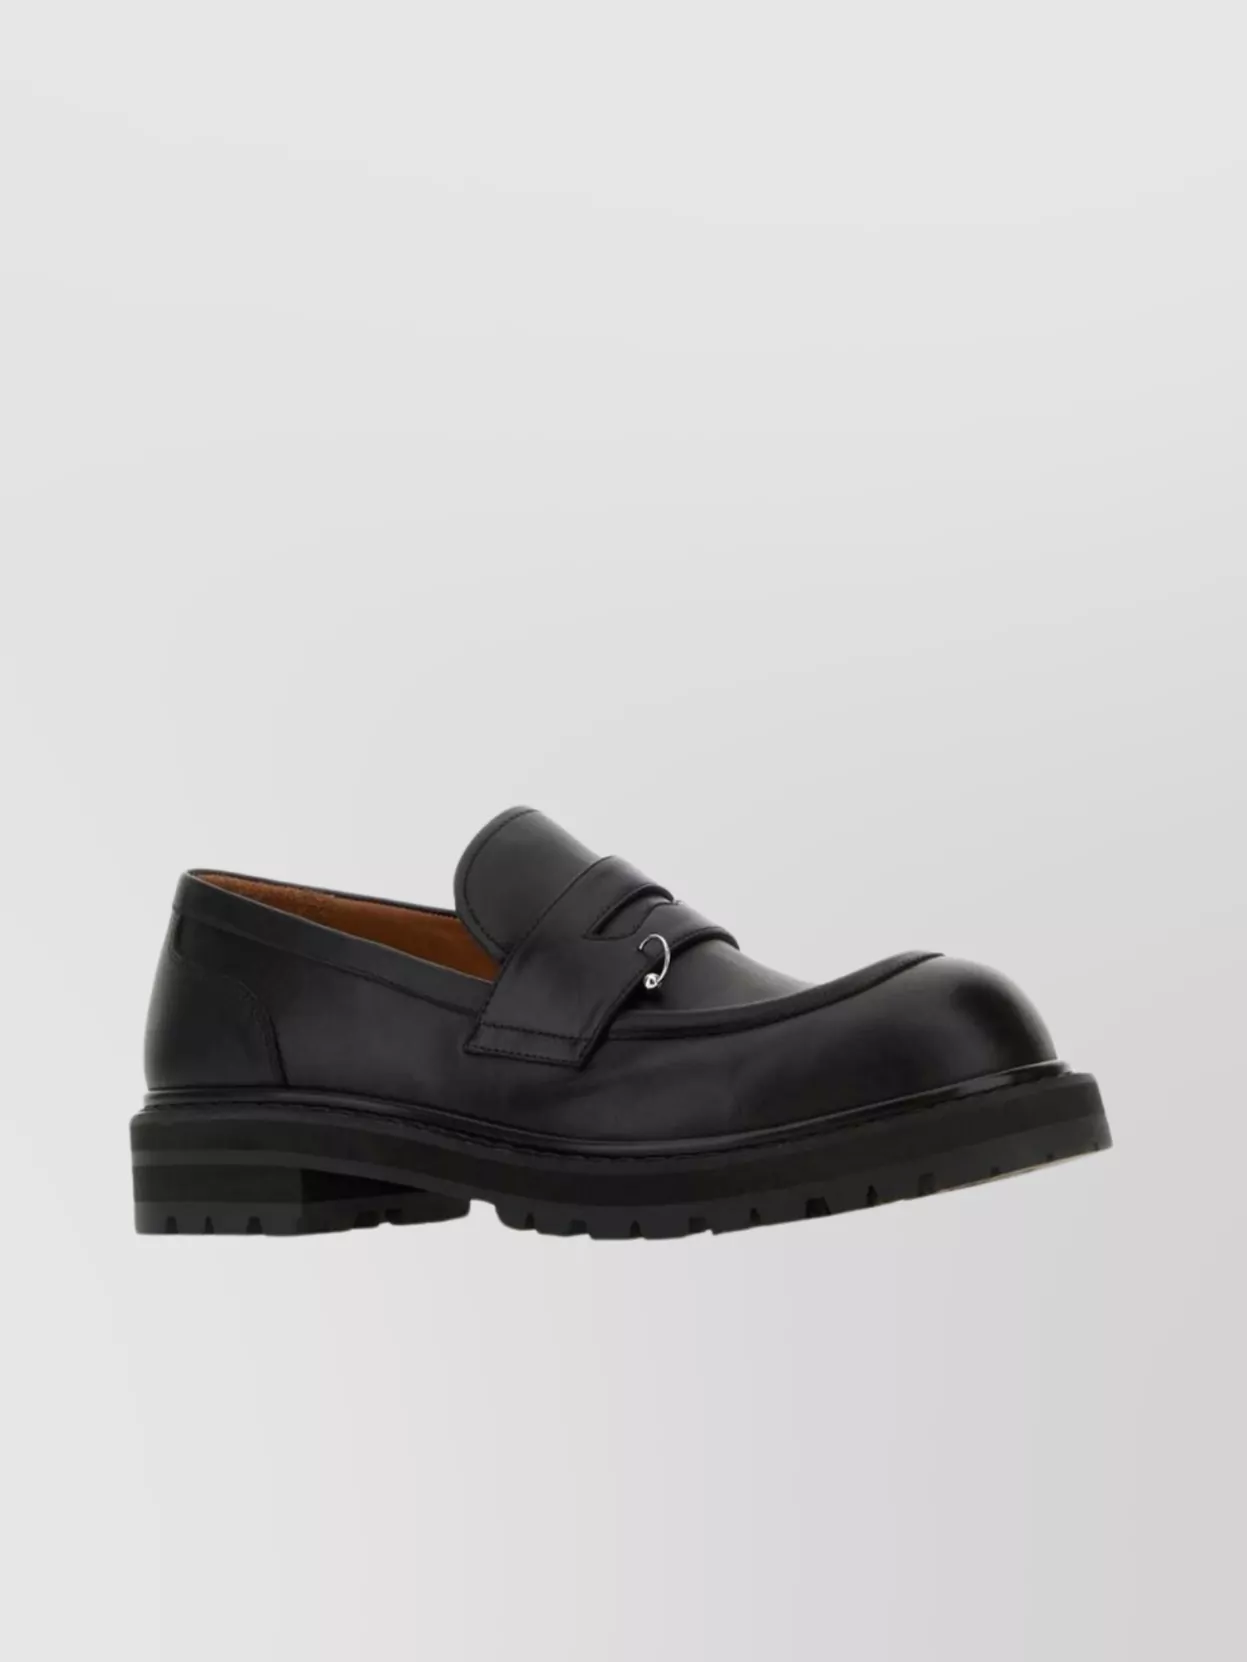 MARNI CHUNKY SOLE PENNY LOAFER ROUND TOE